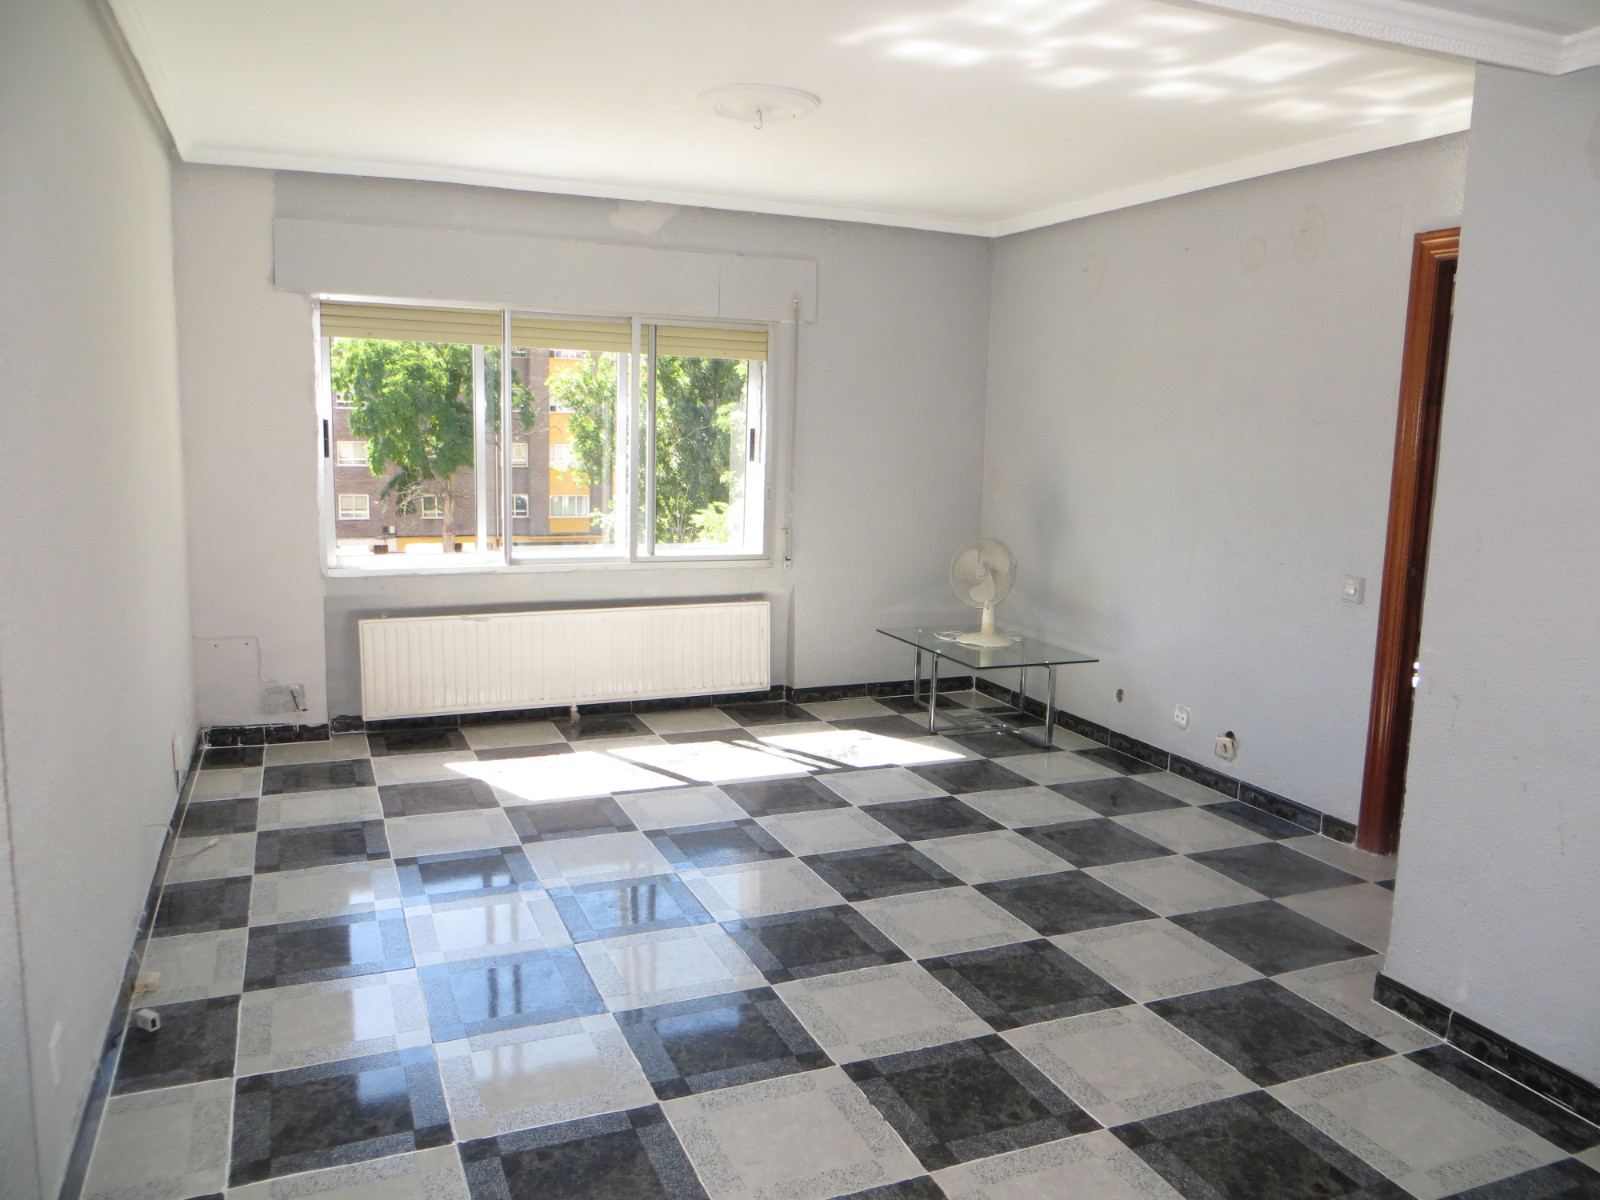 Flat for sale in Arturo Eyries, Valladolid